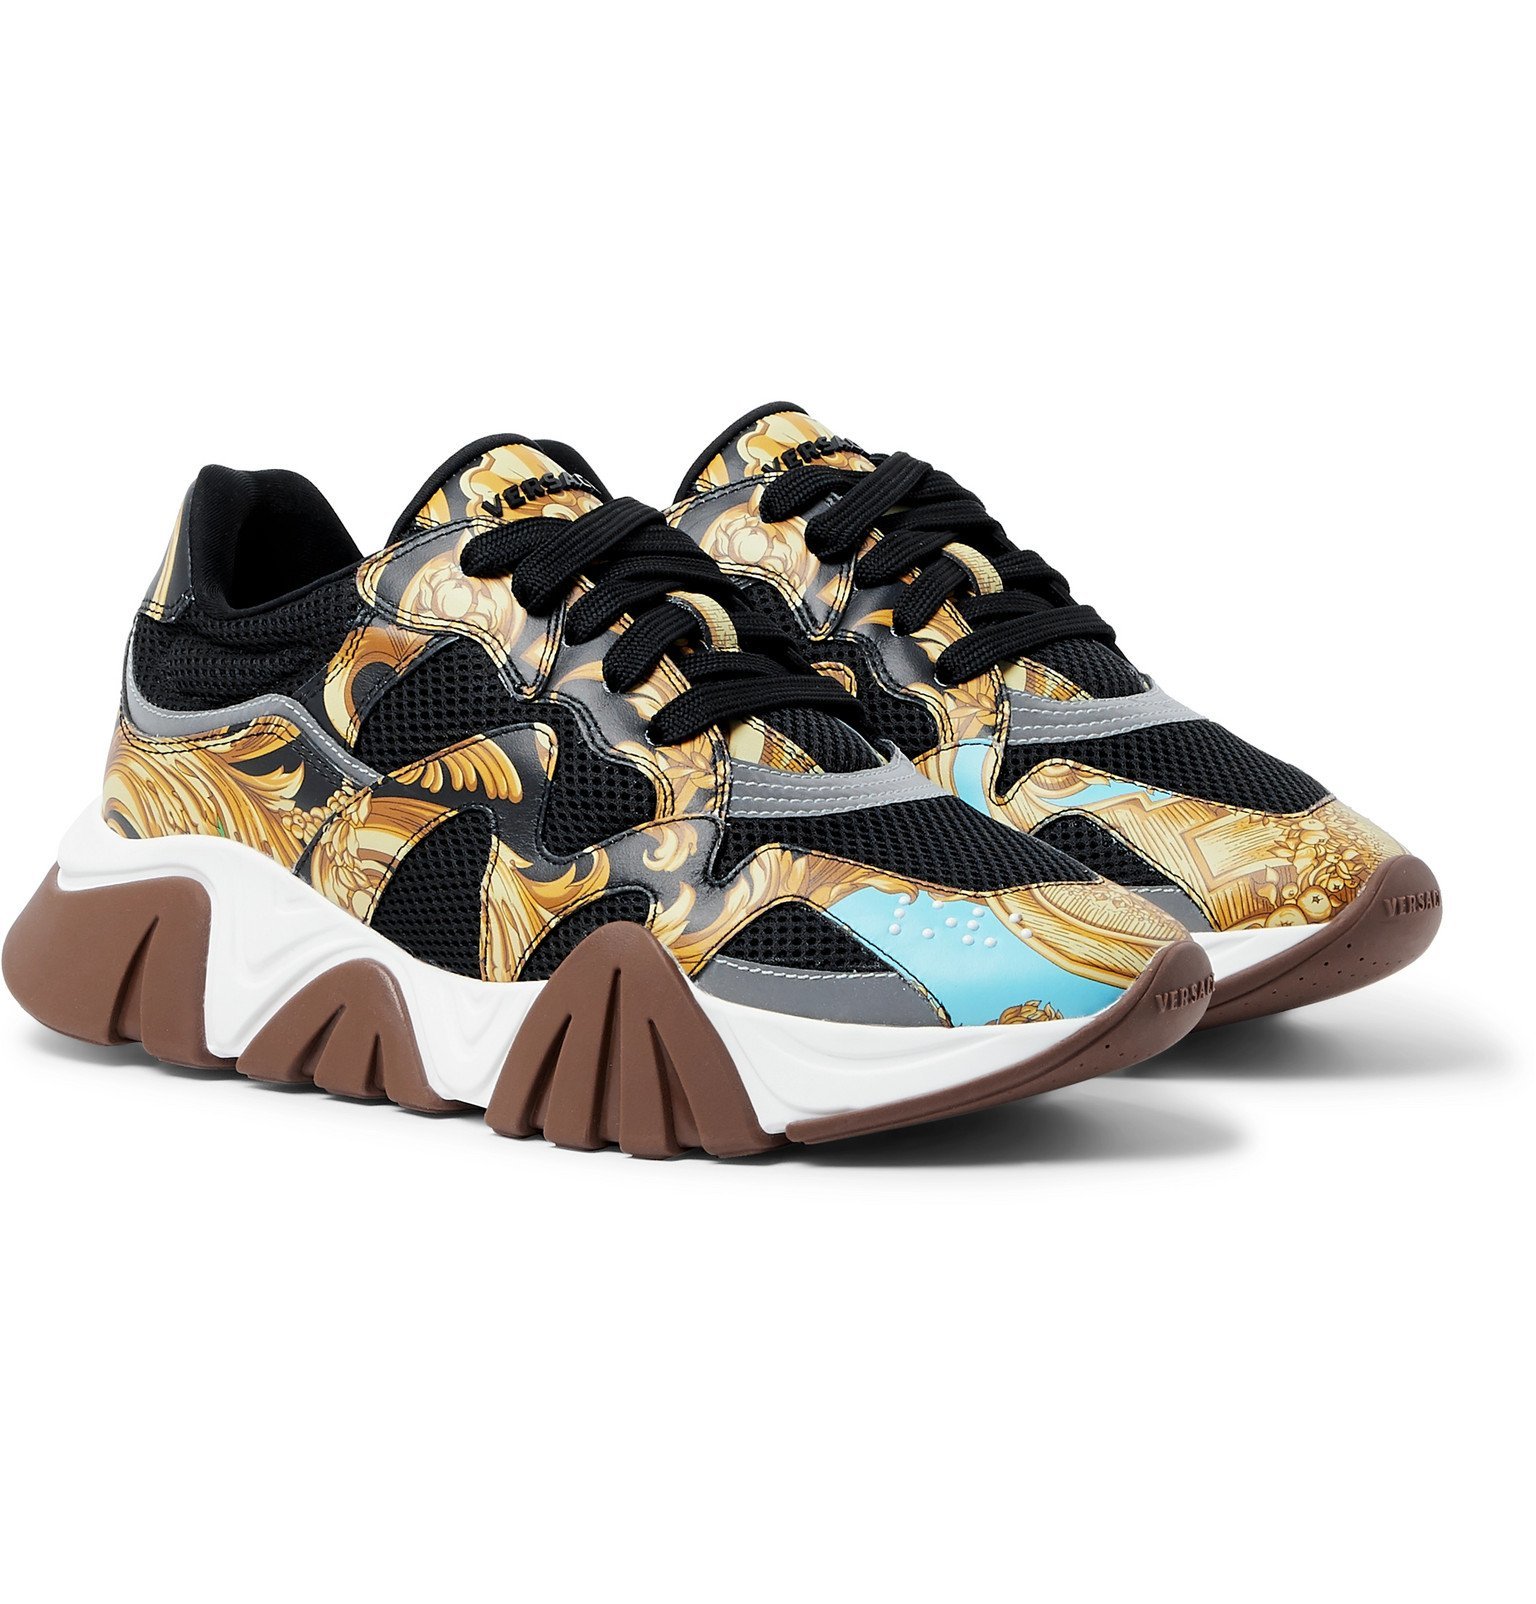 Versace - Squalo Printed Leather and Mesh Sneakers - Black Versace